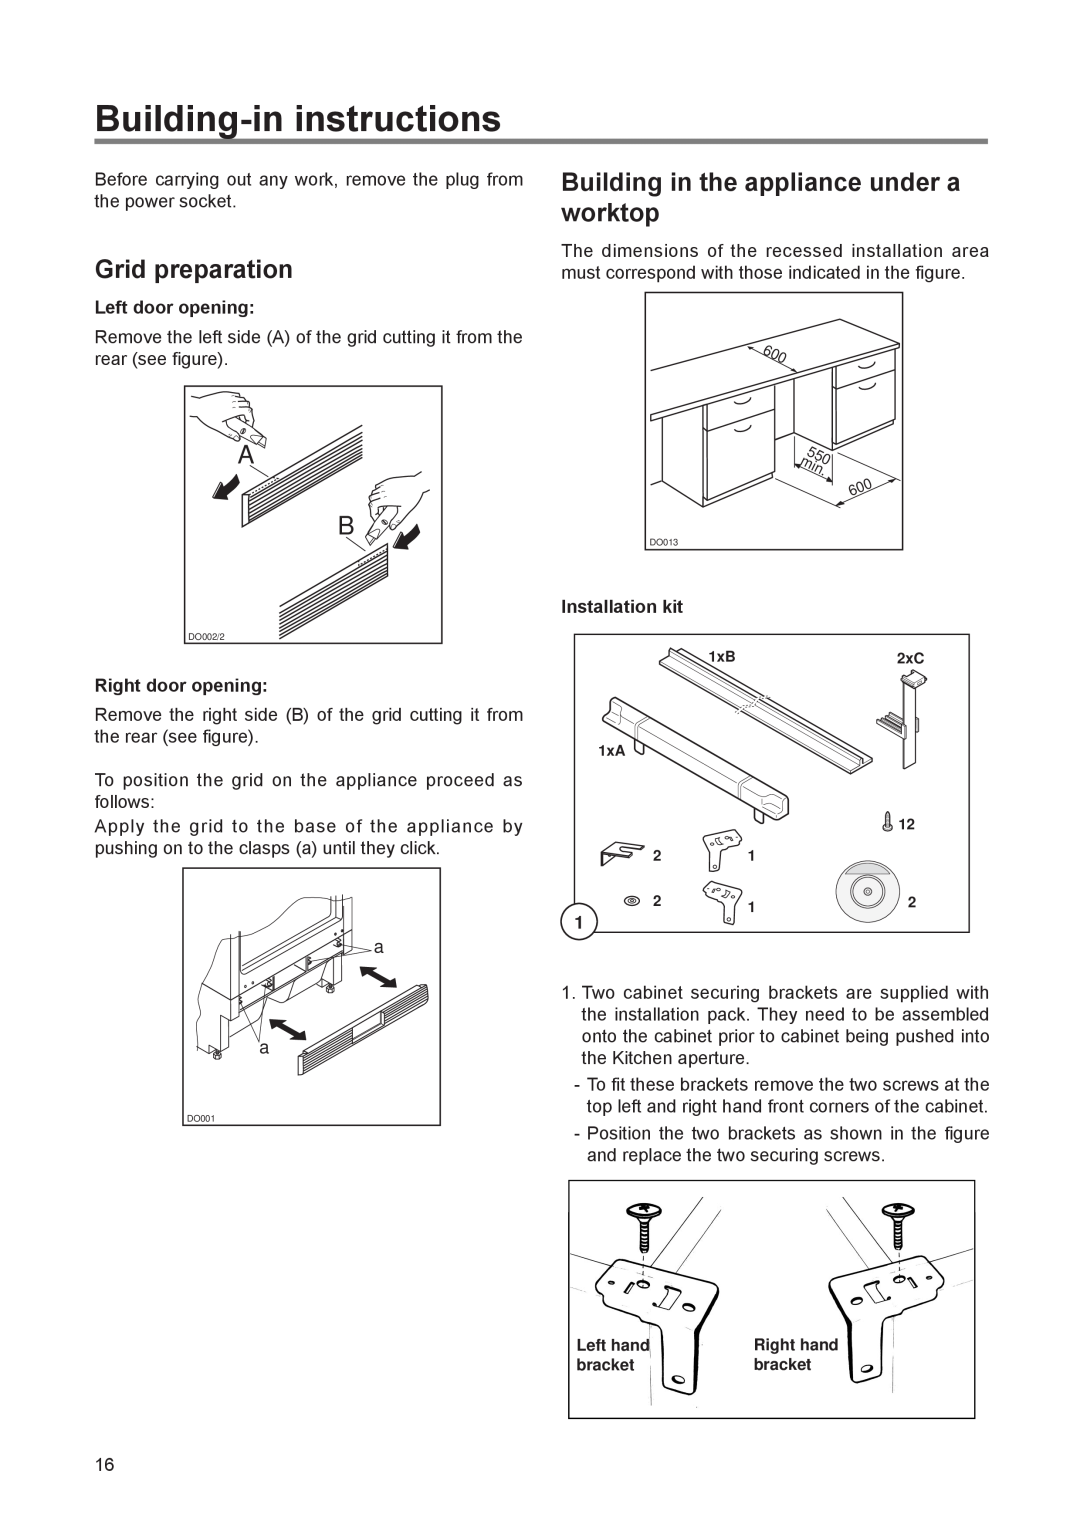 Electrolux FRF 120 manual Building-in instructions, Grid preparation, Building in the appliance under a worktop 